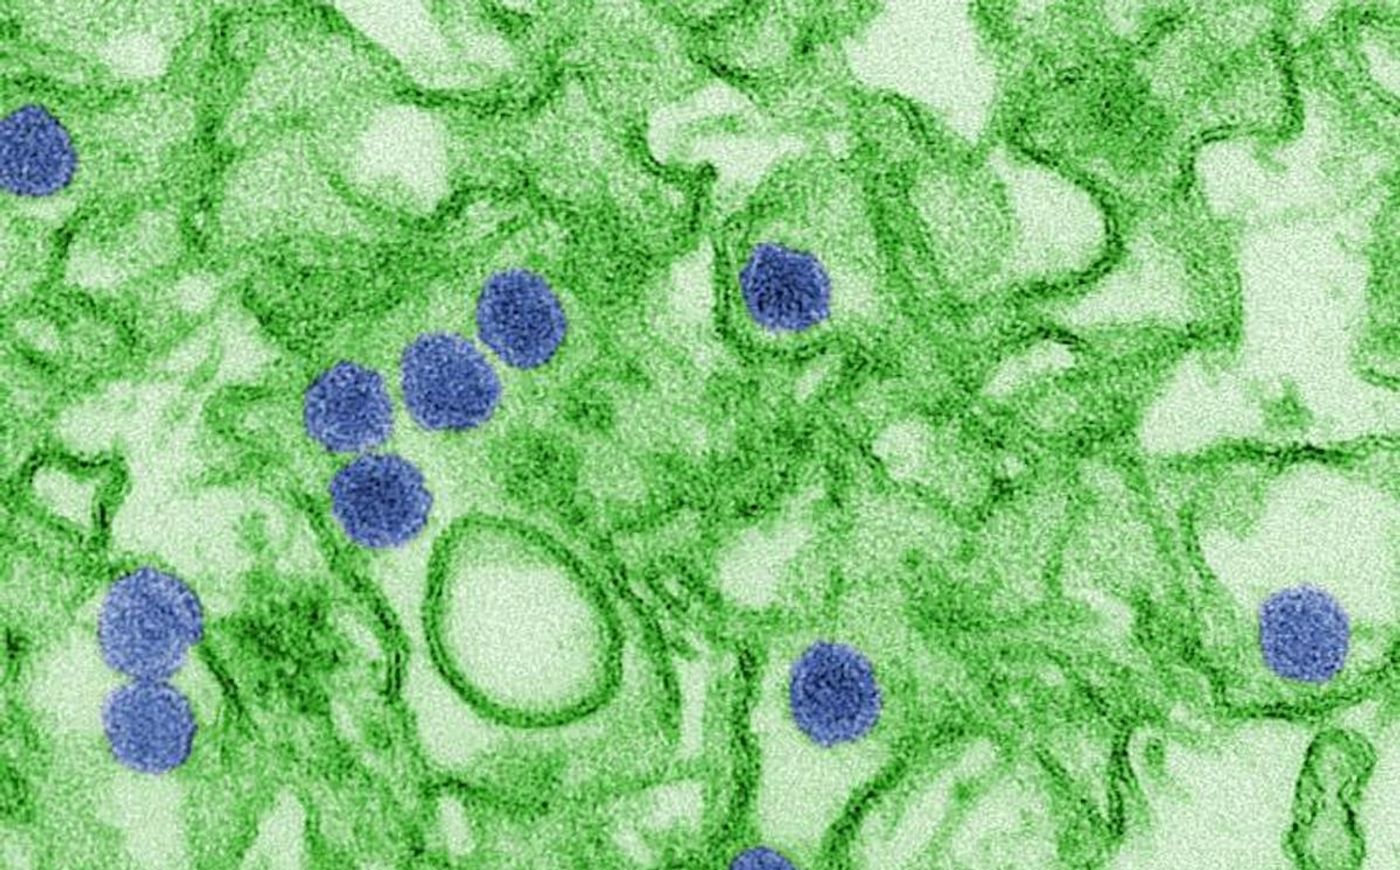 Digitally-colorized transmission electron microscopic image of Zika virus, a member of the family Flaviviridae, grown in LLC-MK2 culture cells. Virus particles, here colored blue, are 40 nm in diameter, with an outer envelope, and an inner dense core./ Credit: CDC/ Cynthia Goldsmith